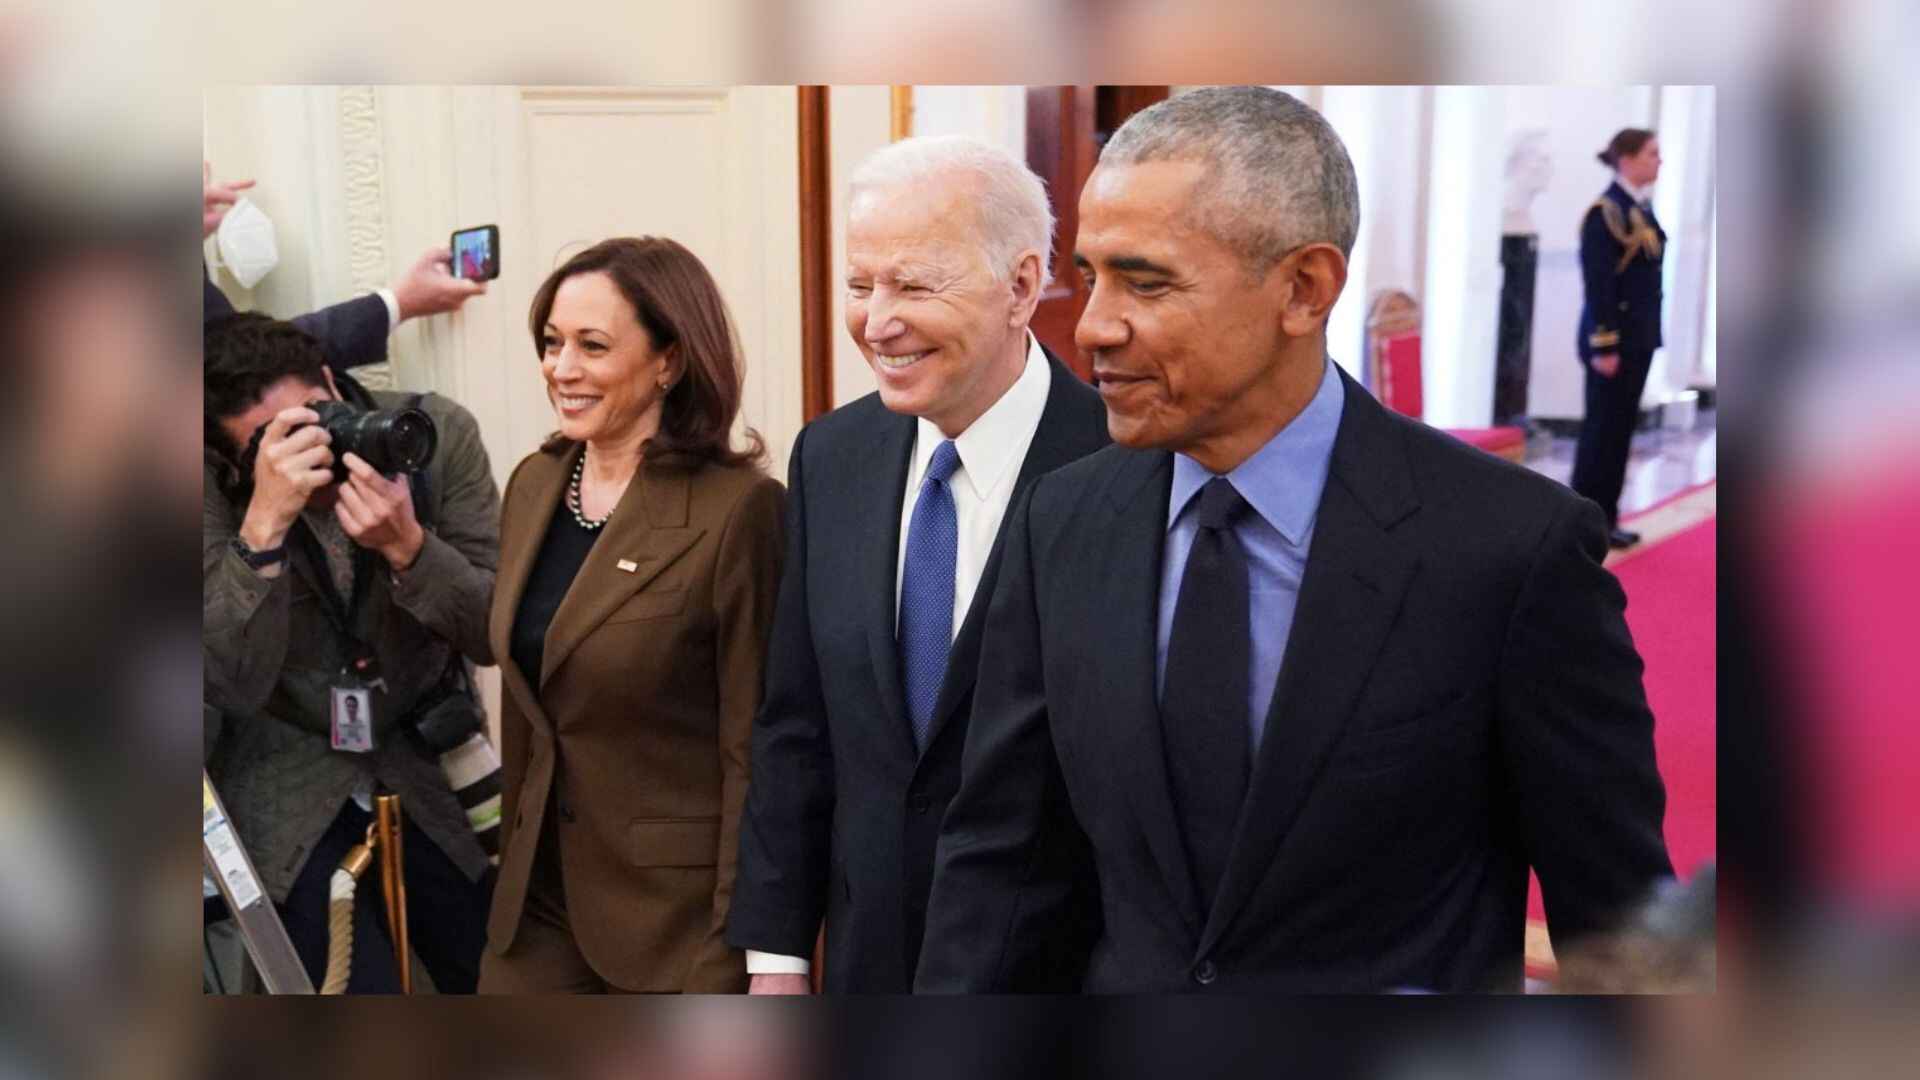 Obama Set To Endorse Harris As Democrats Gear Up For Nomination Process